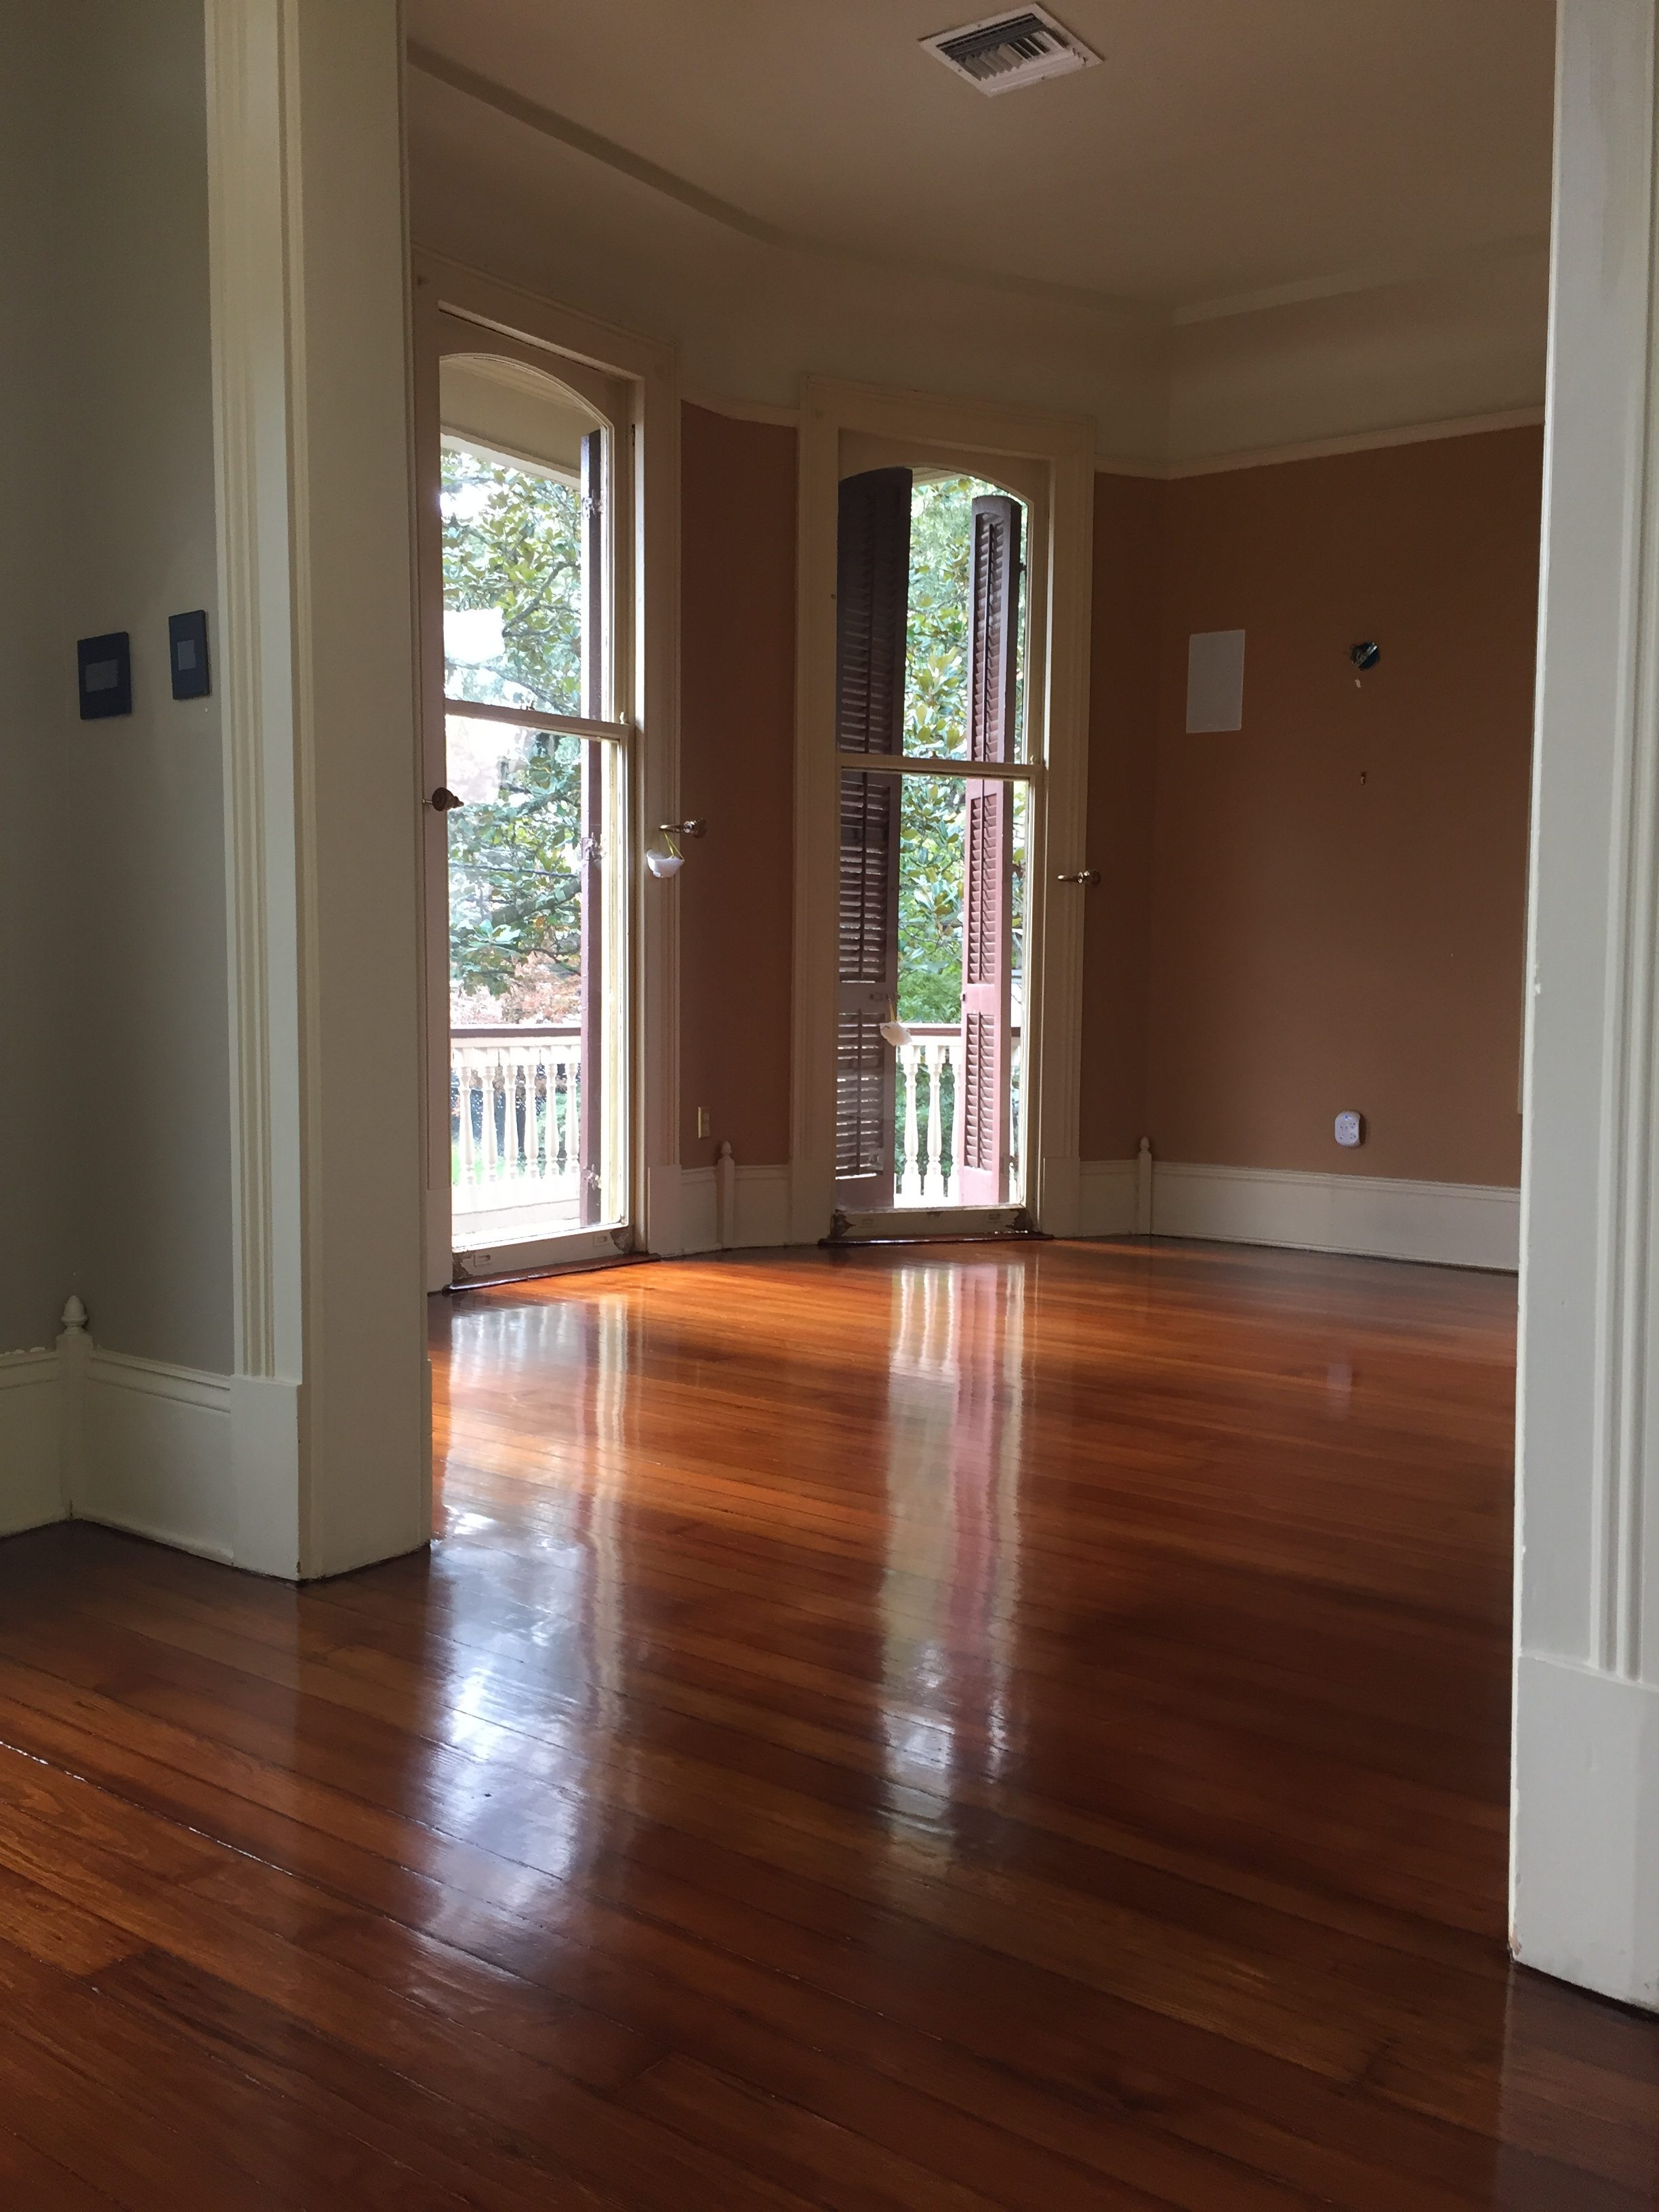 These refinished pine floors have a glossy finish.